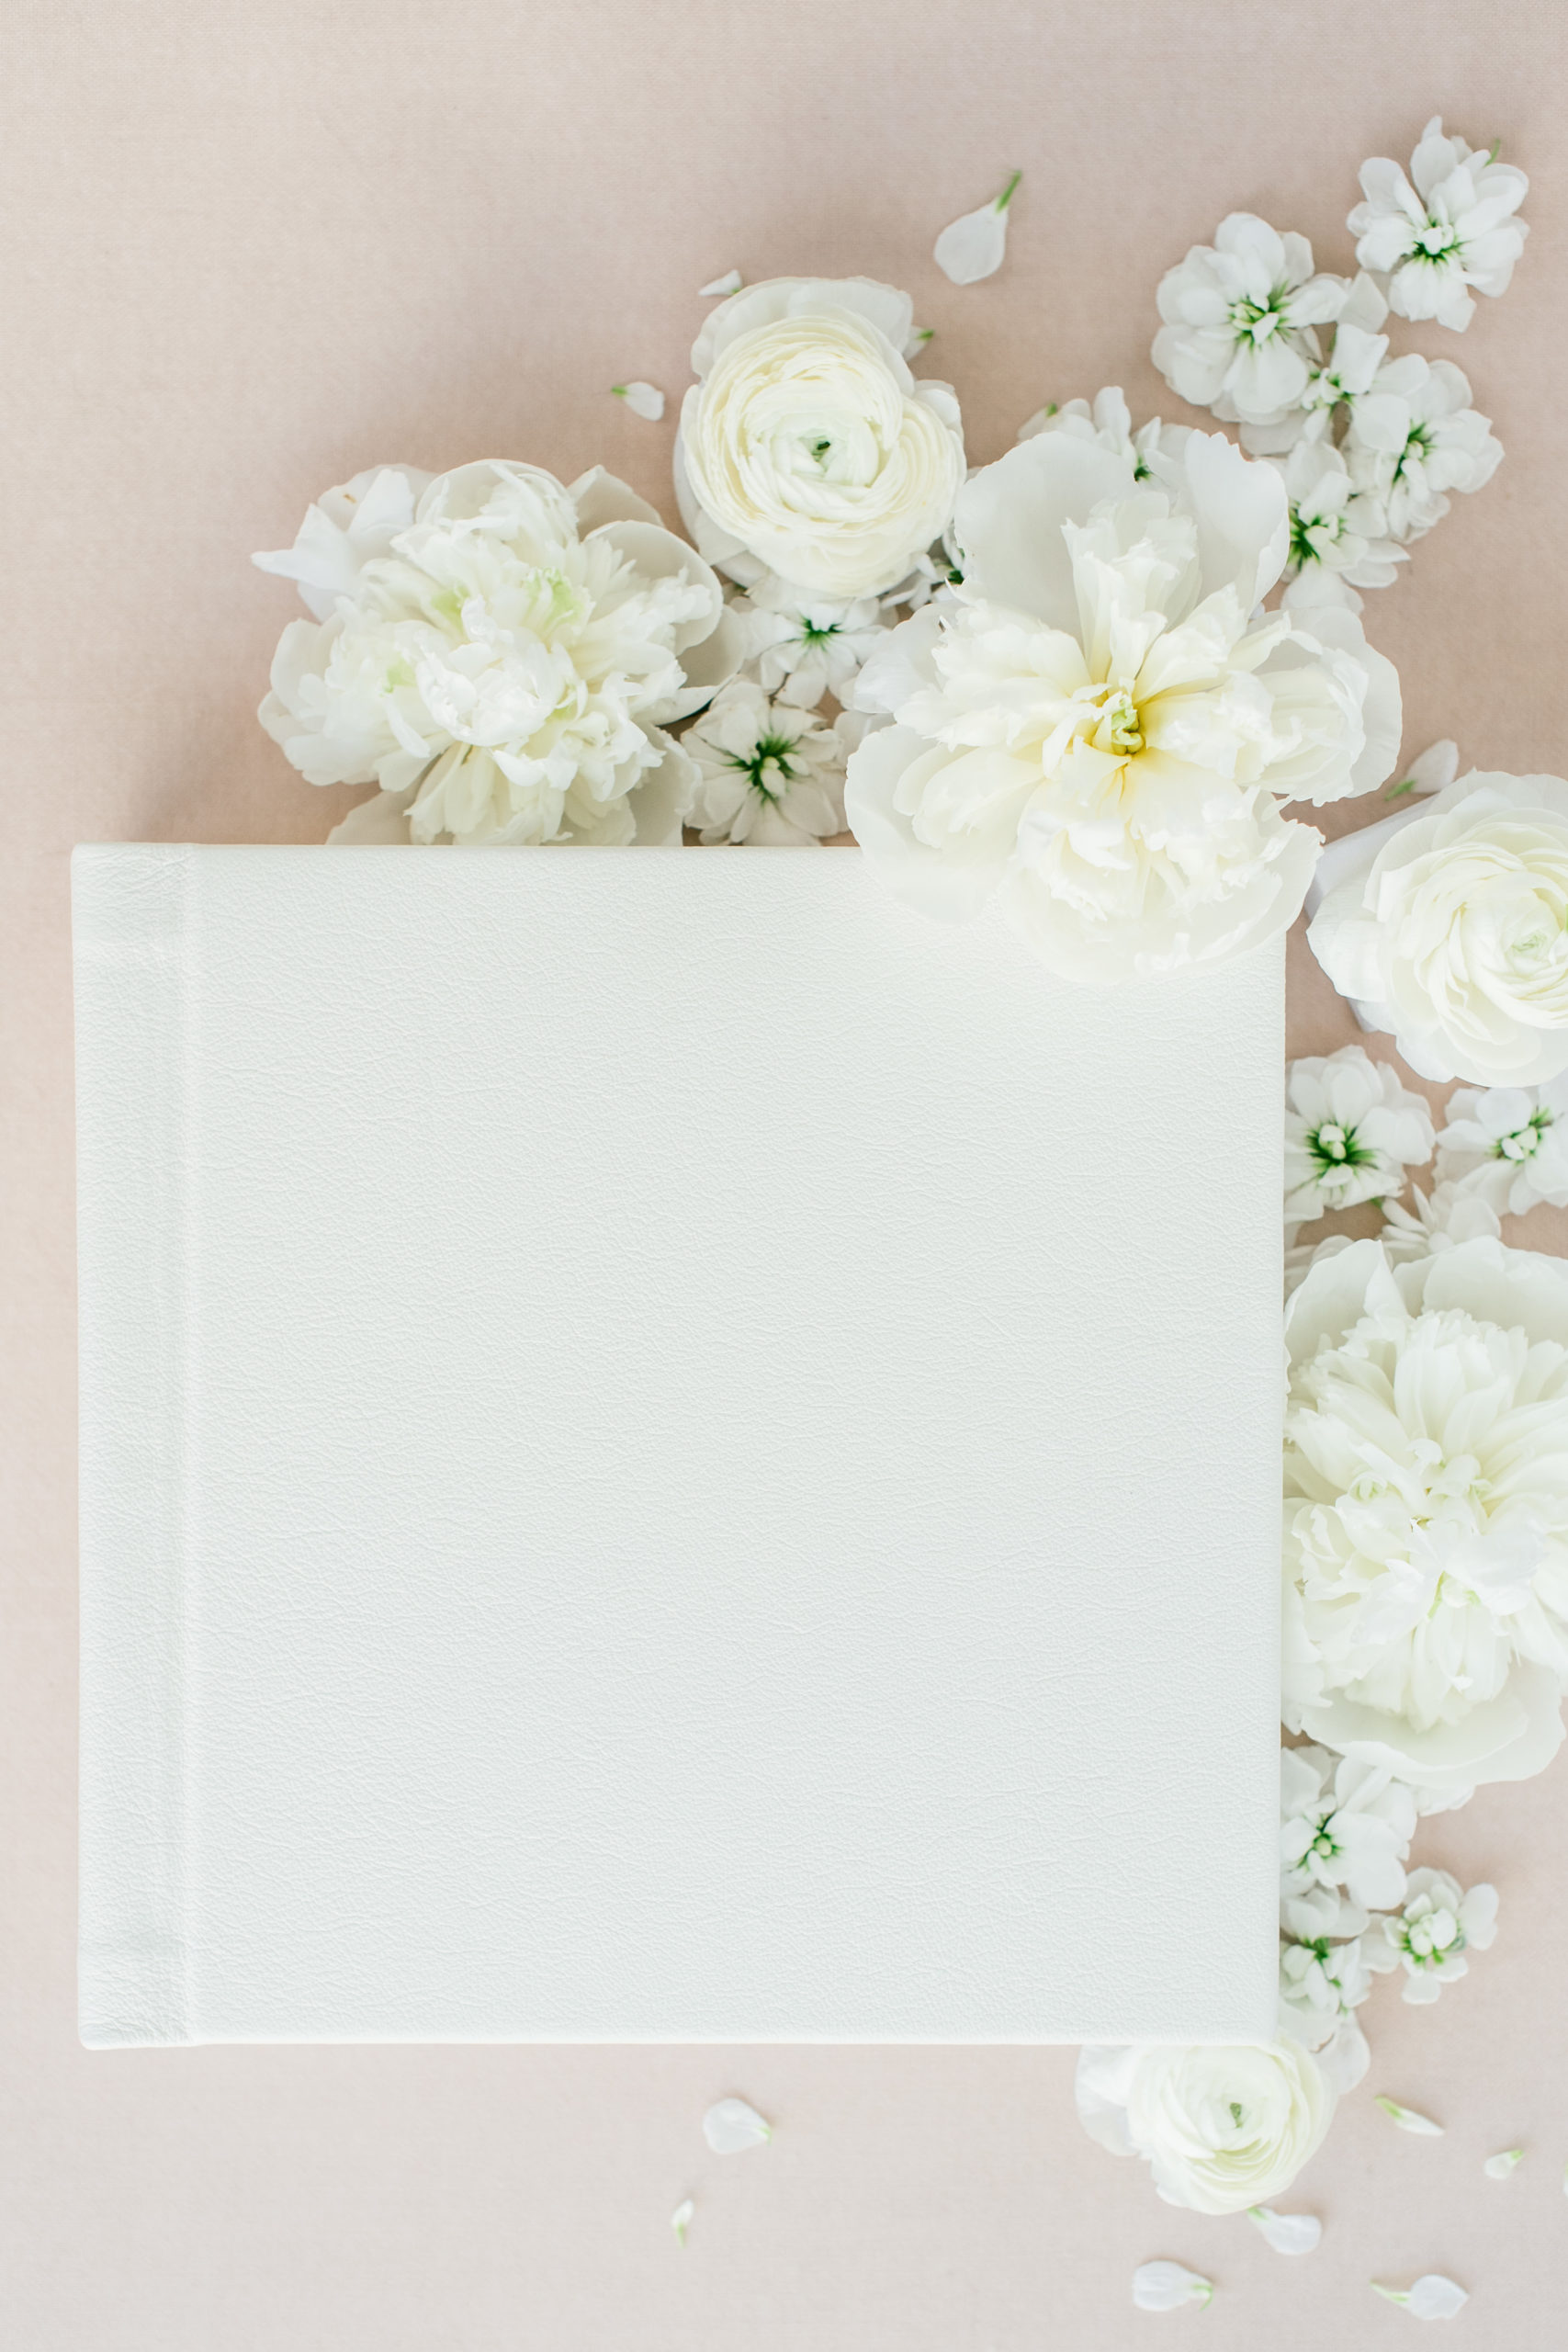 A white leather wedding album surrounded by flowers